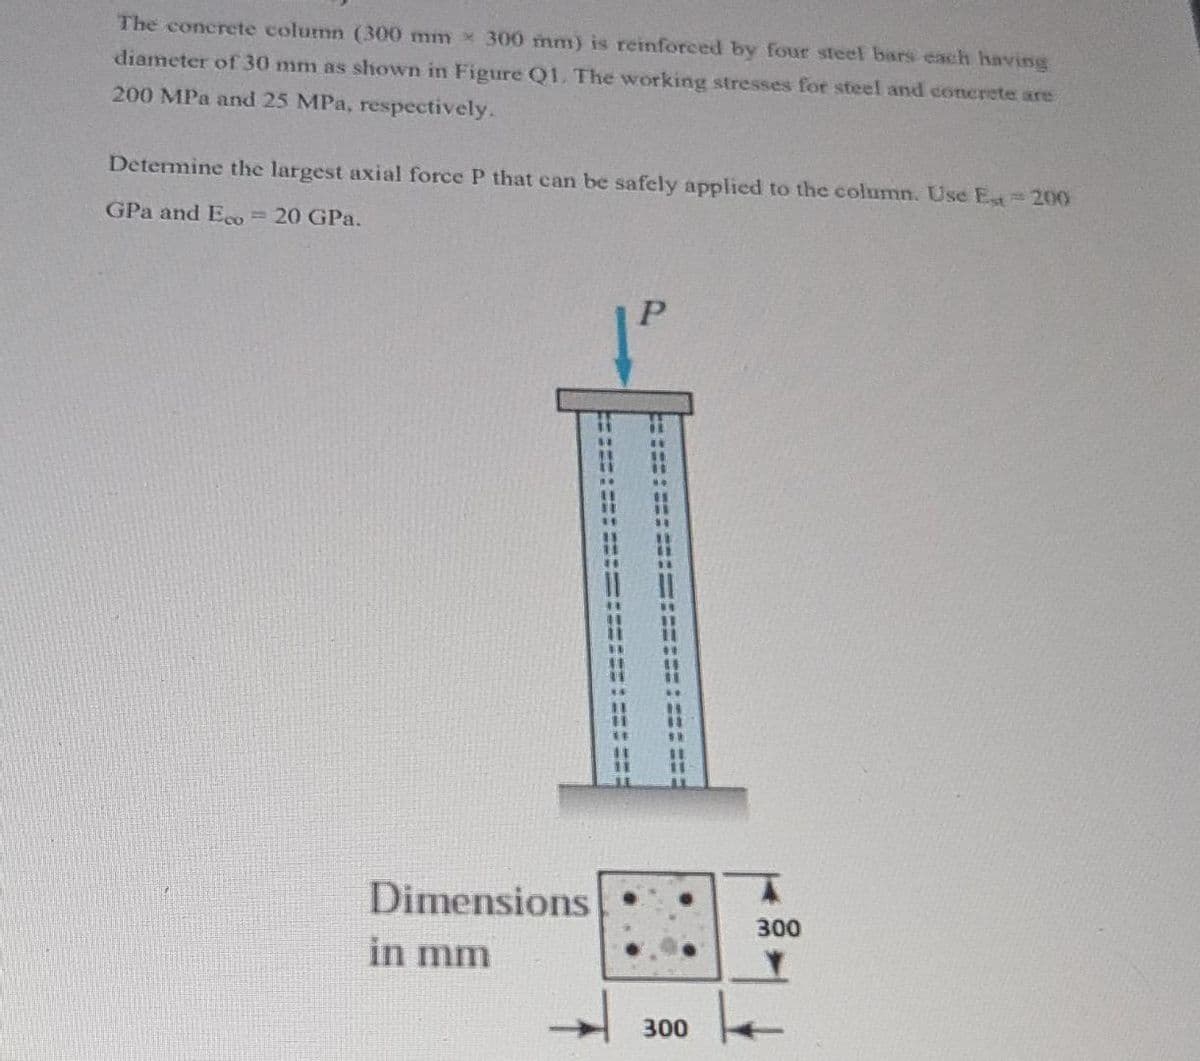 The concrete column (300 mm x 300 mm) is reinforced by four steel bars each having
diameter of 30 mm as shown in Figure Q1. The working stresses for steel and concrete are
200 MPa and 25 MPa, respectively.
Determine the largest axial force P that can be safely applied to the column. Use Est - 200
GPa and Eco = 20 GPa.
Dimensions
in mm
300
300